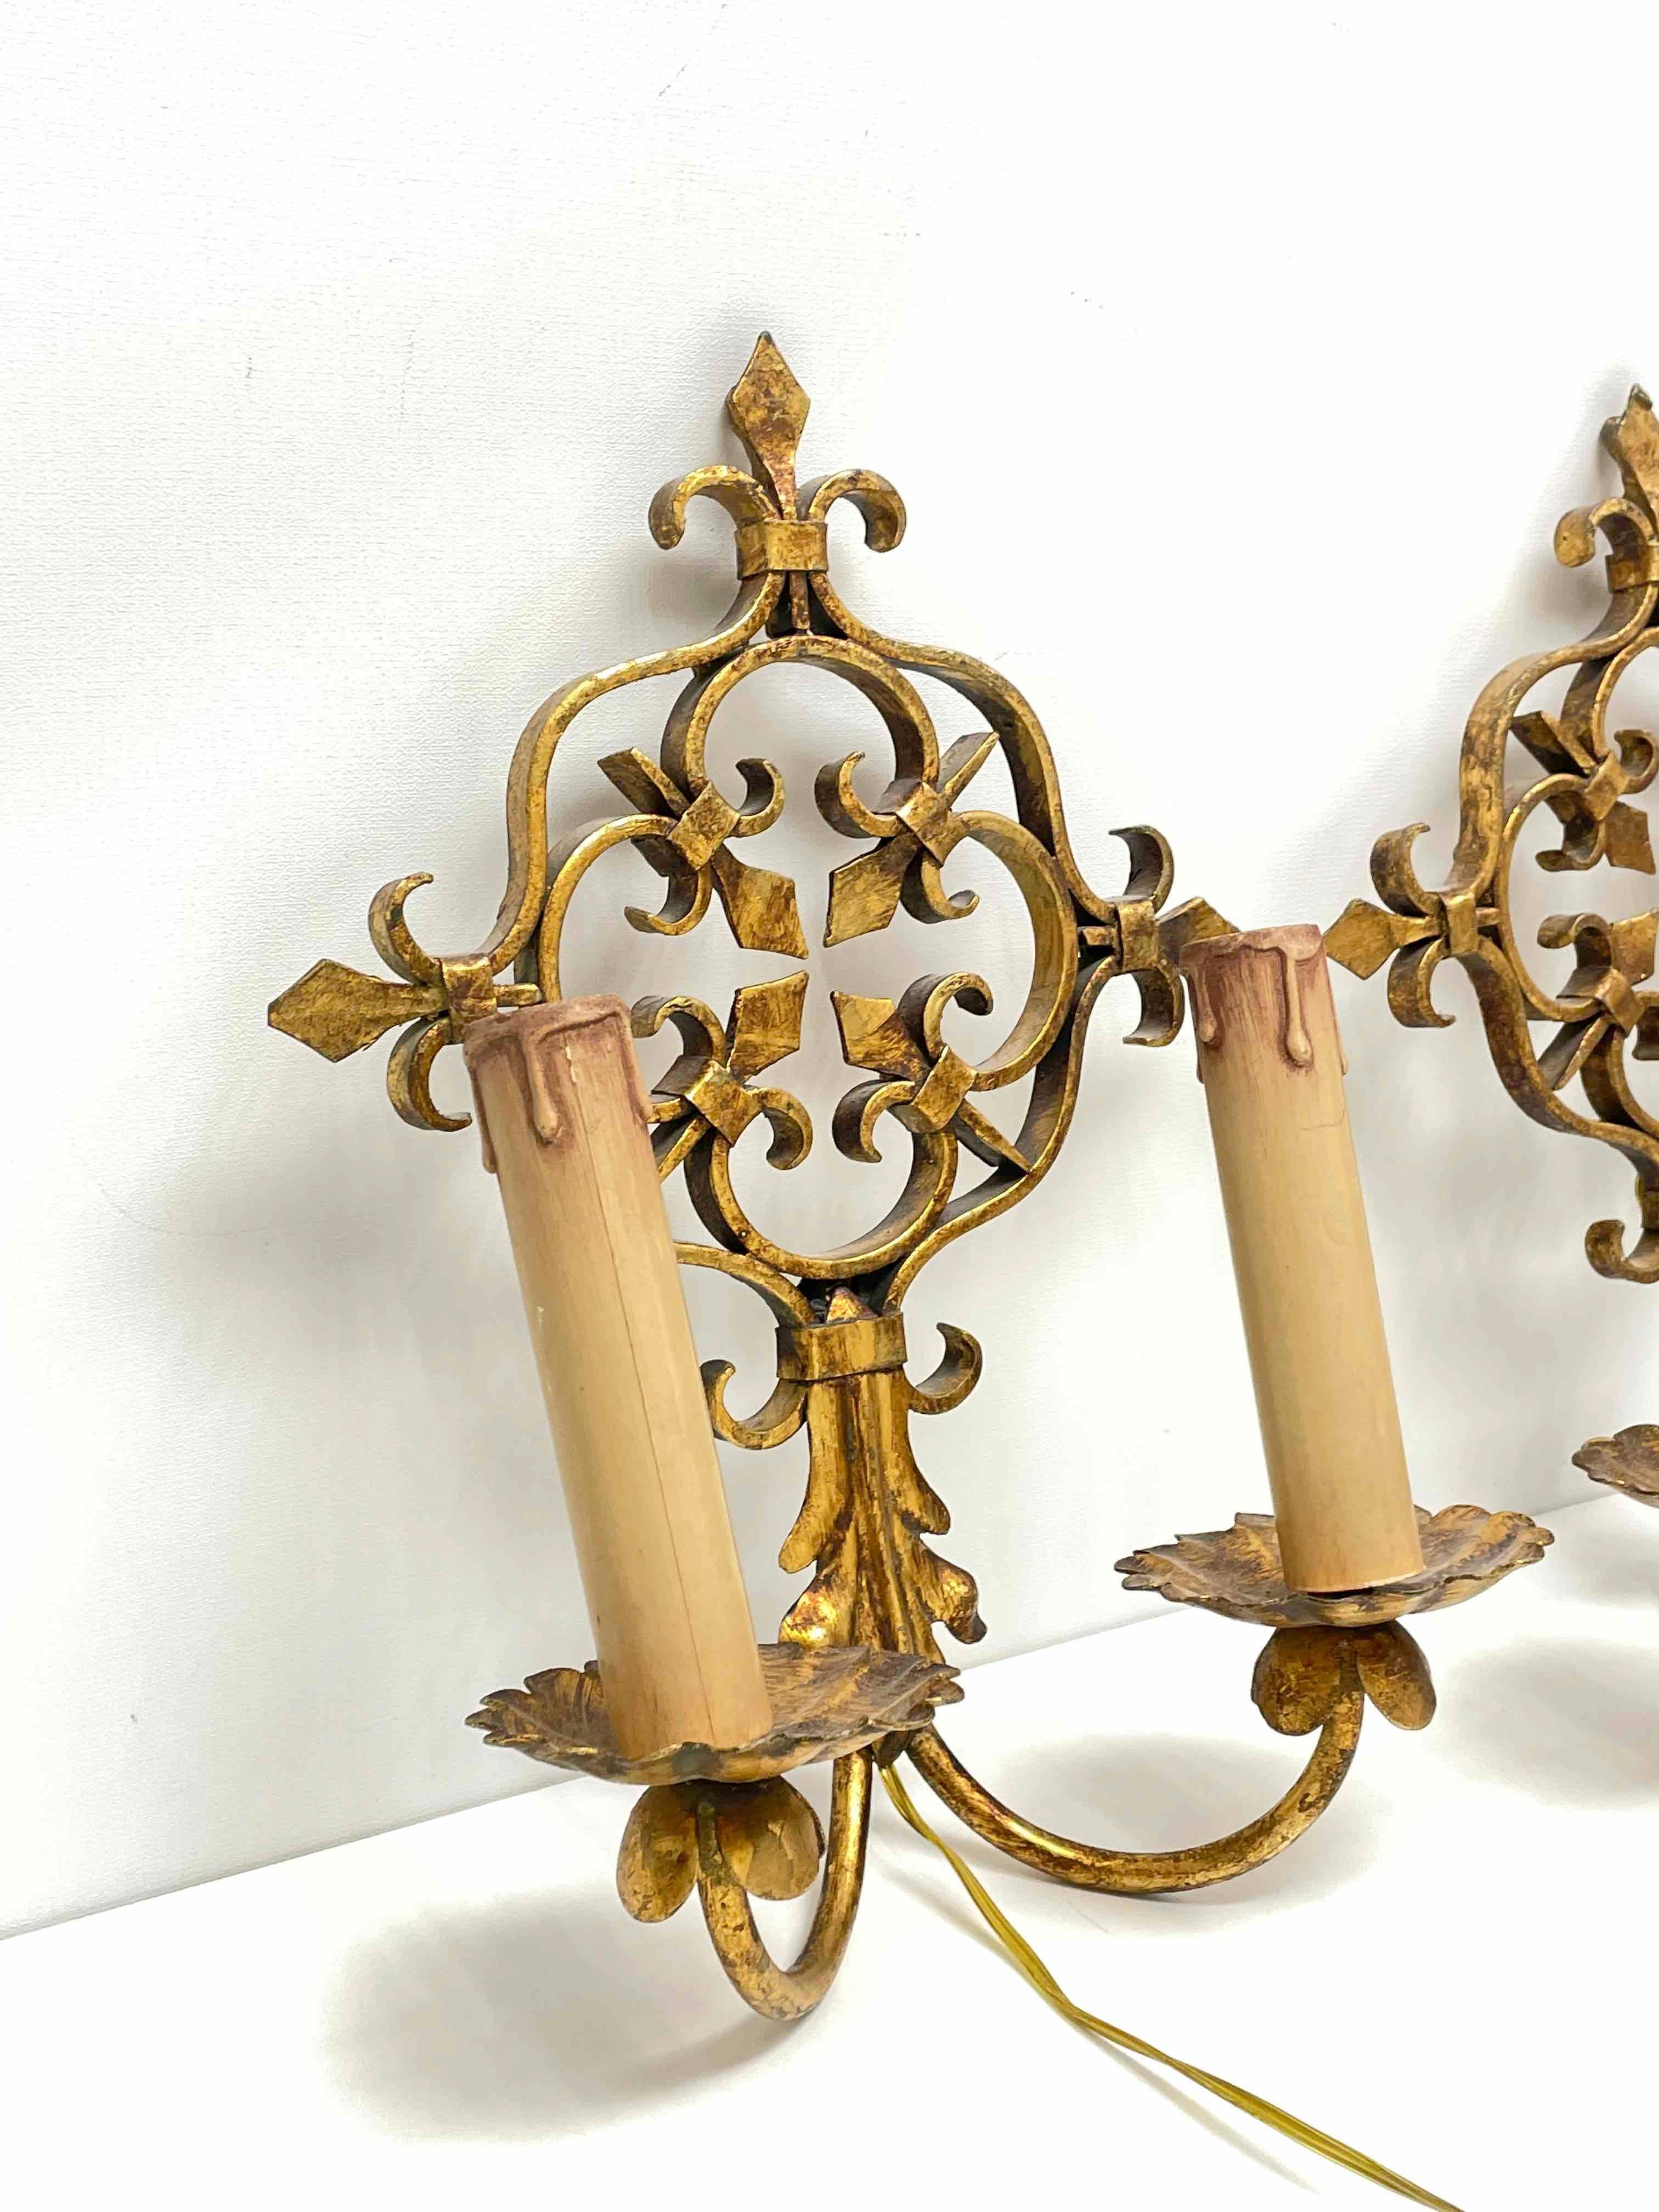 Pair of Gilt Metal Tole Toleware Sconces by Banci Firenze, Italy, 1960s For Sale 2